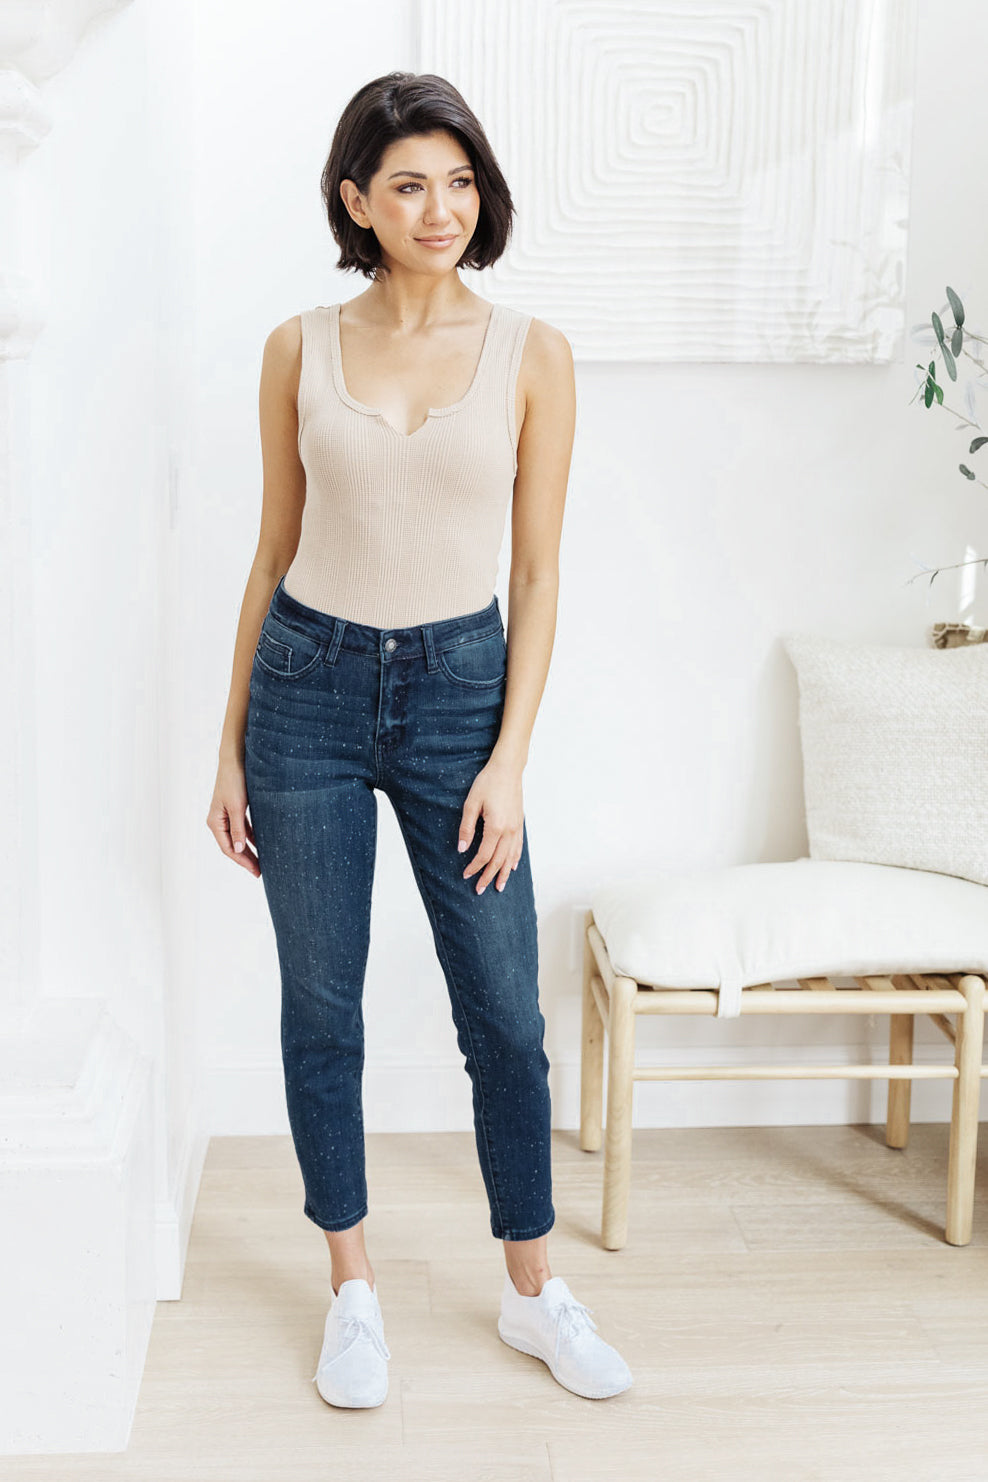 Women's Relaxed Fit Jeans – Everlane